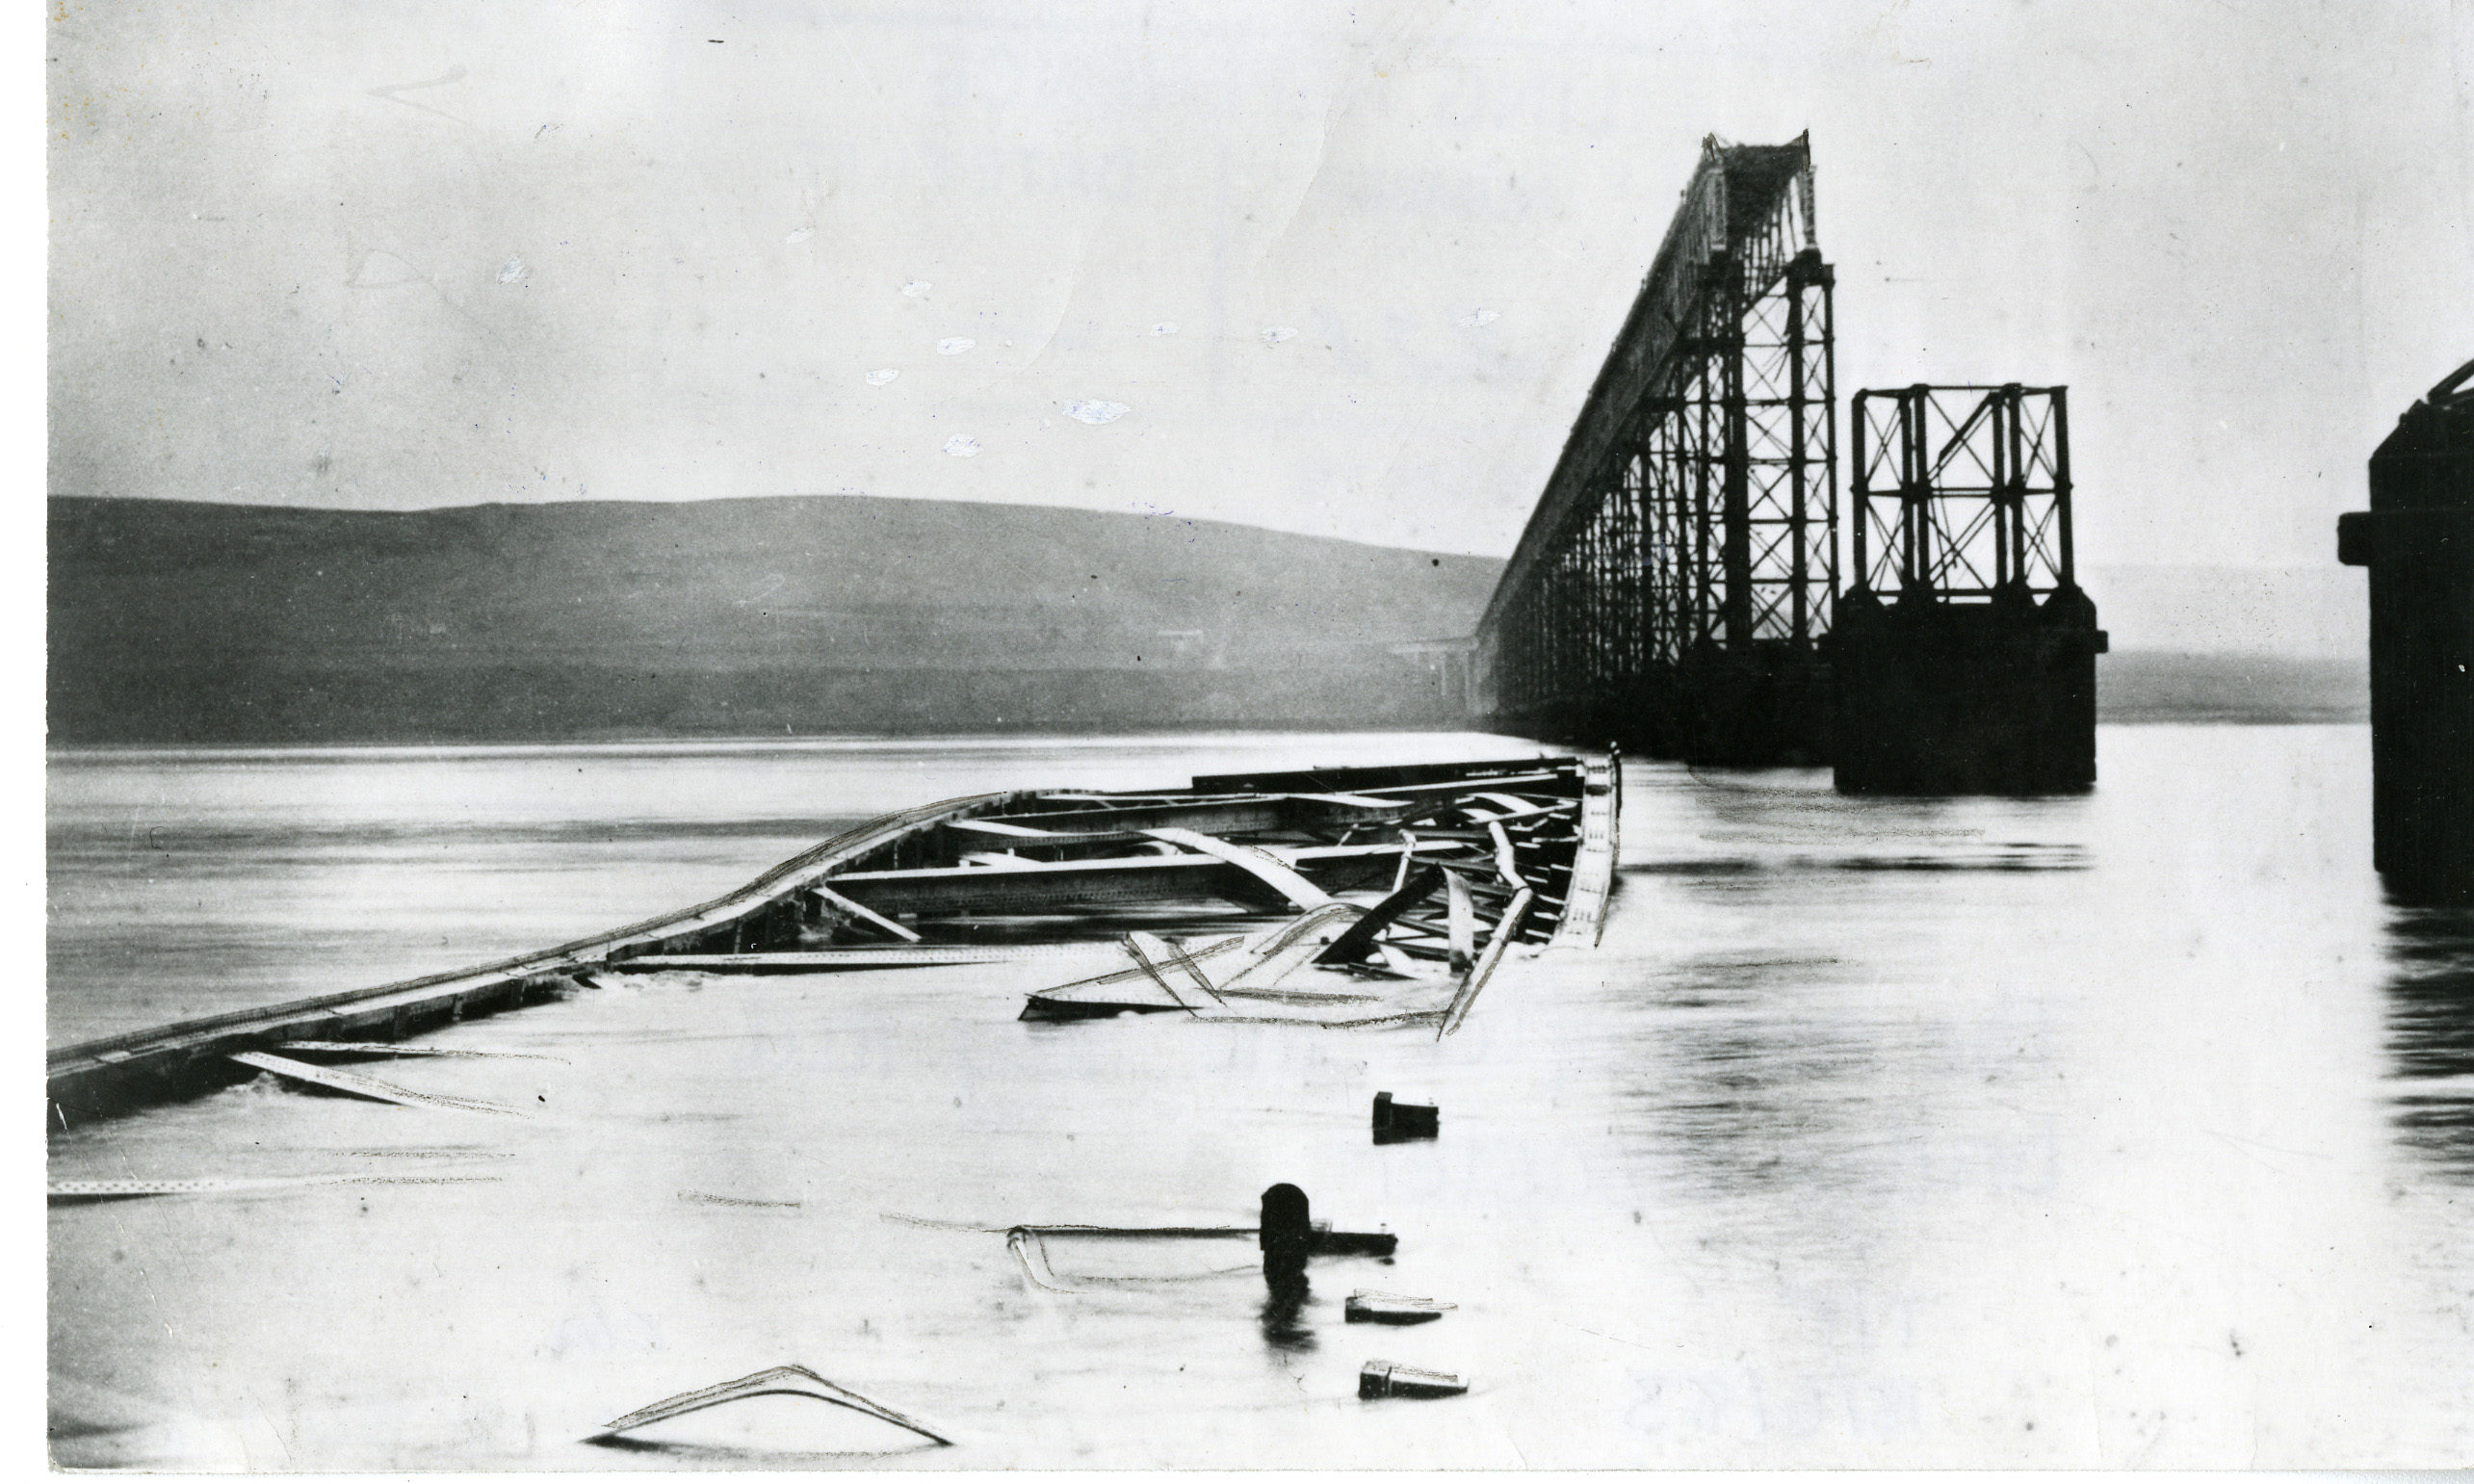 Aftermath of the Tay Bridge Disaster in December 1879.